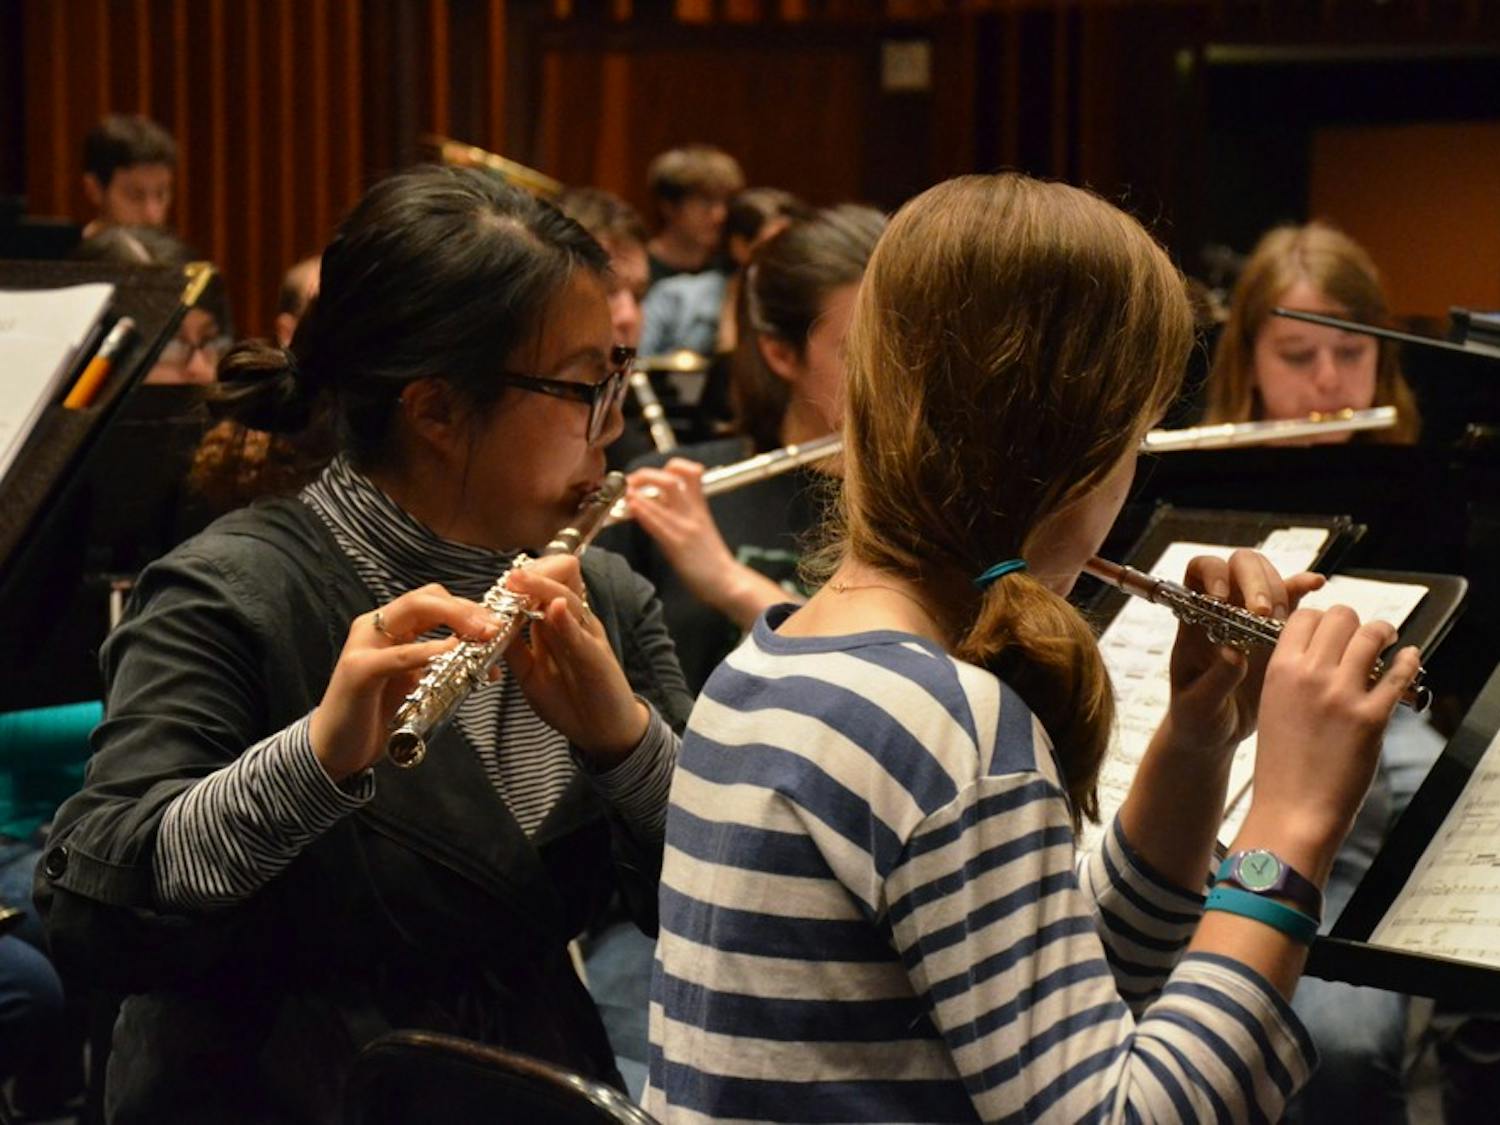 The Dartmouth College Wind Ensemble performed in the 2016 New Music Festival on Tuesday, May 3.